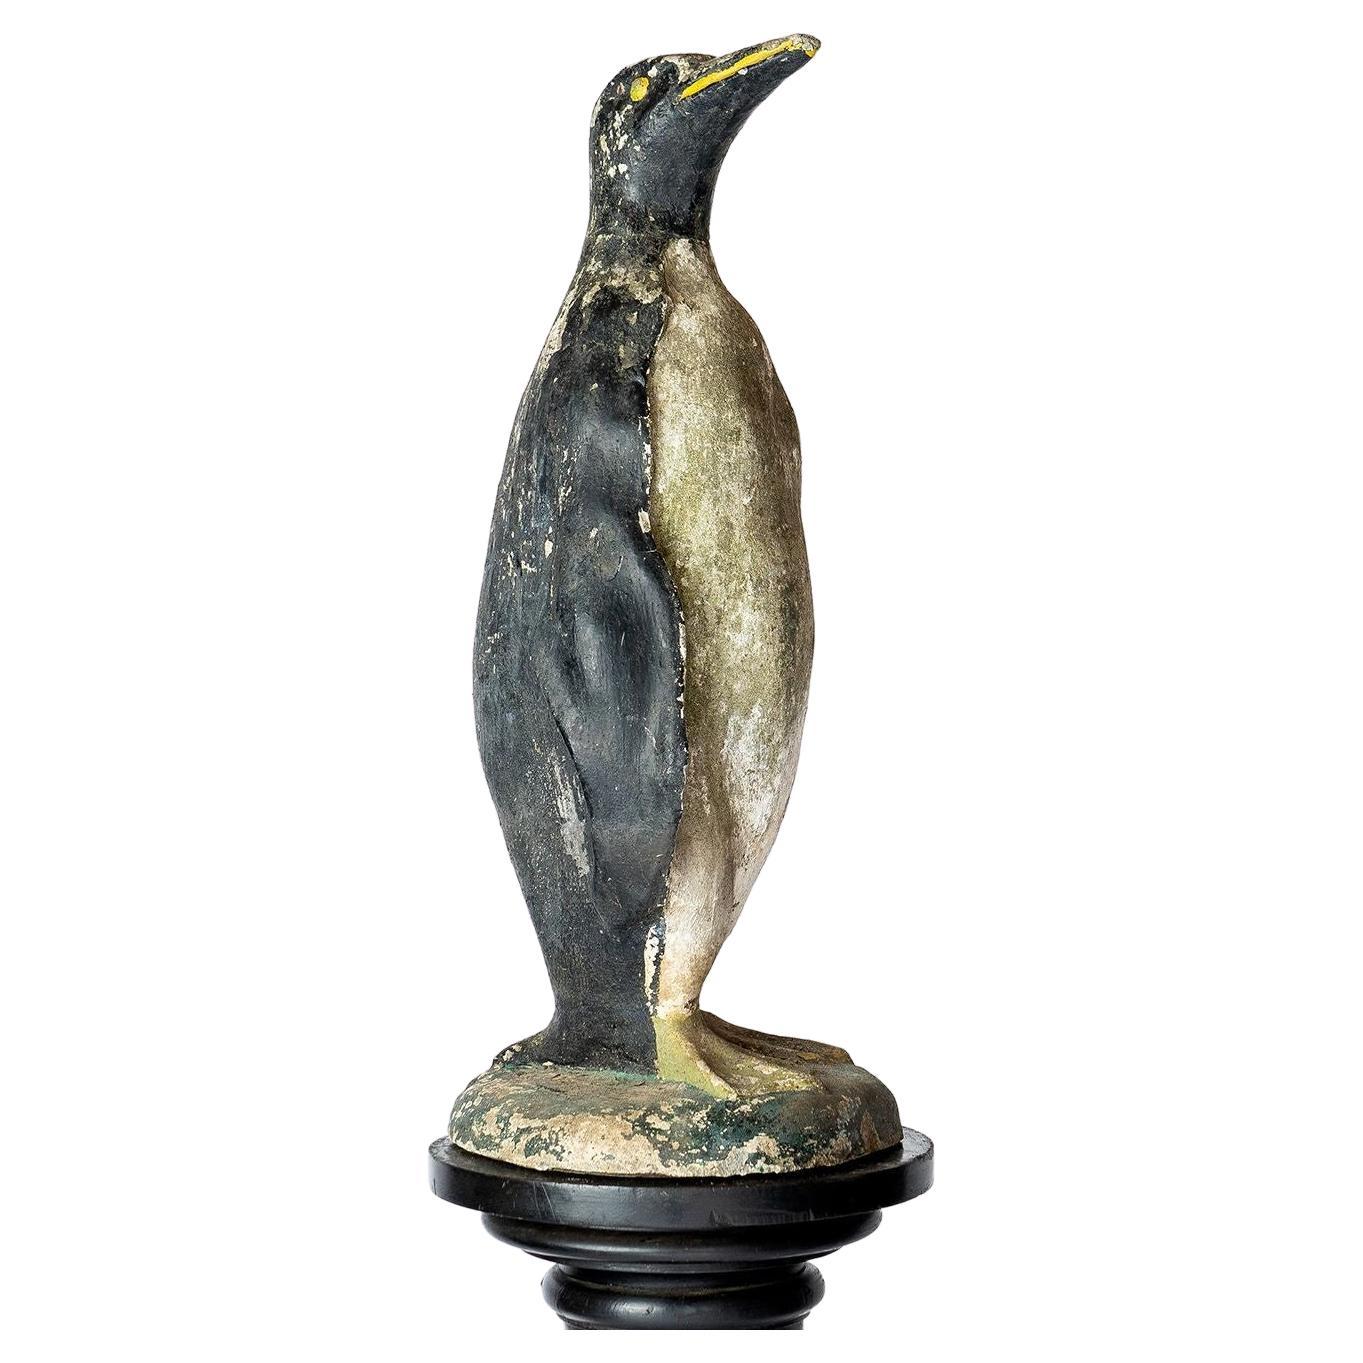 Vintage French Reconstituted Stone Penguin Garden Statue Figure c. 1930s